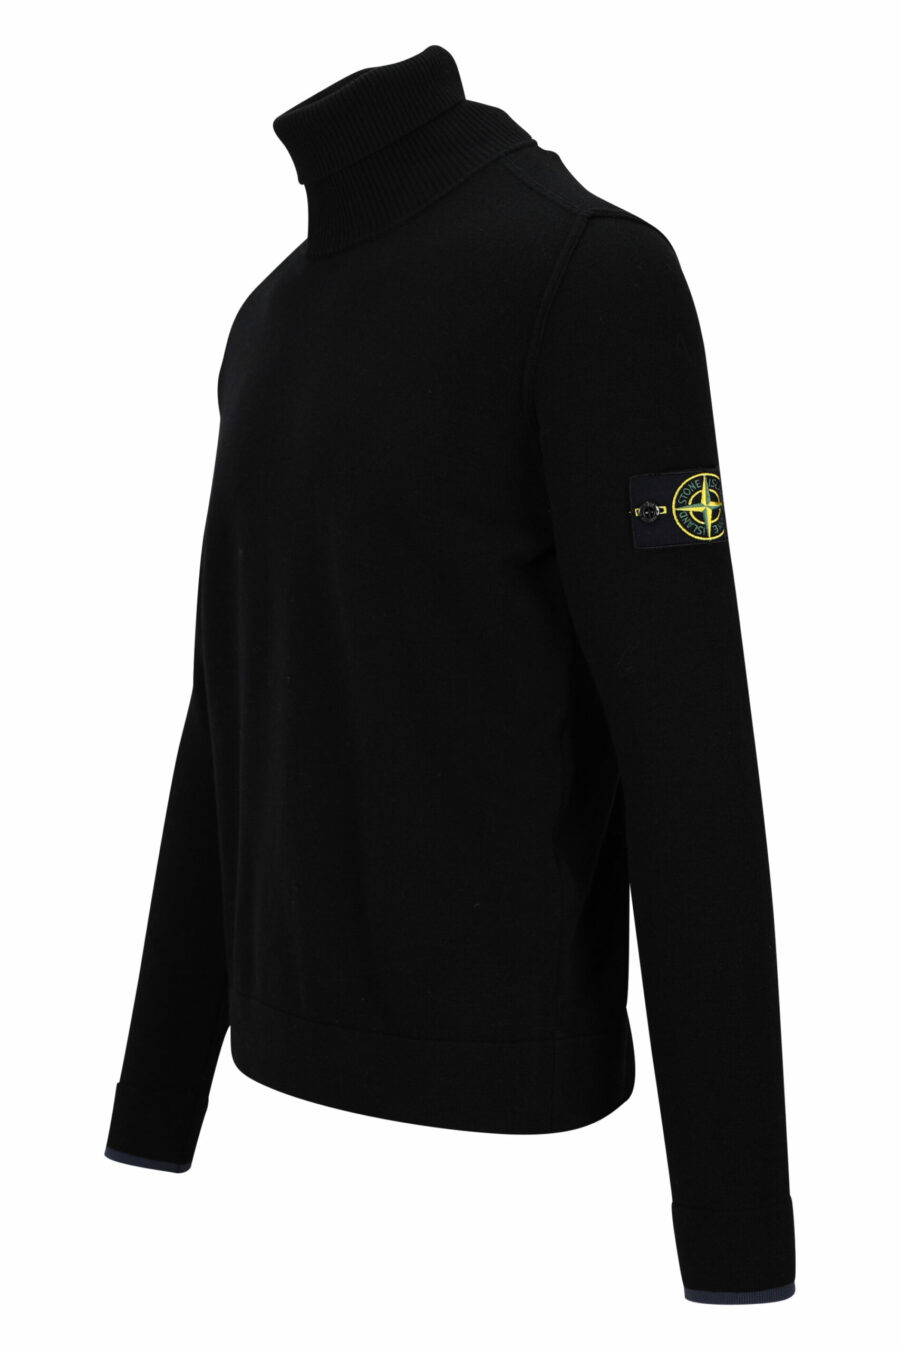 Black sweatshirt with high collar and side logo patch - 8052572741814 1 scaled